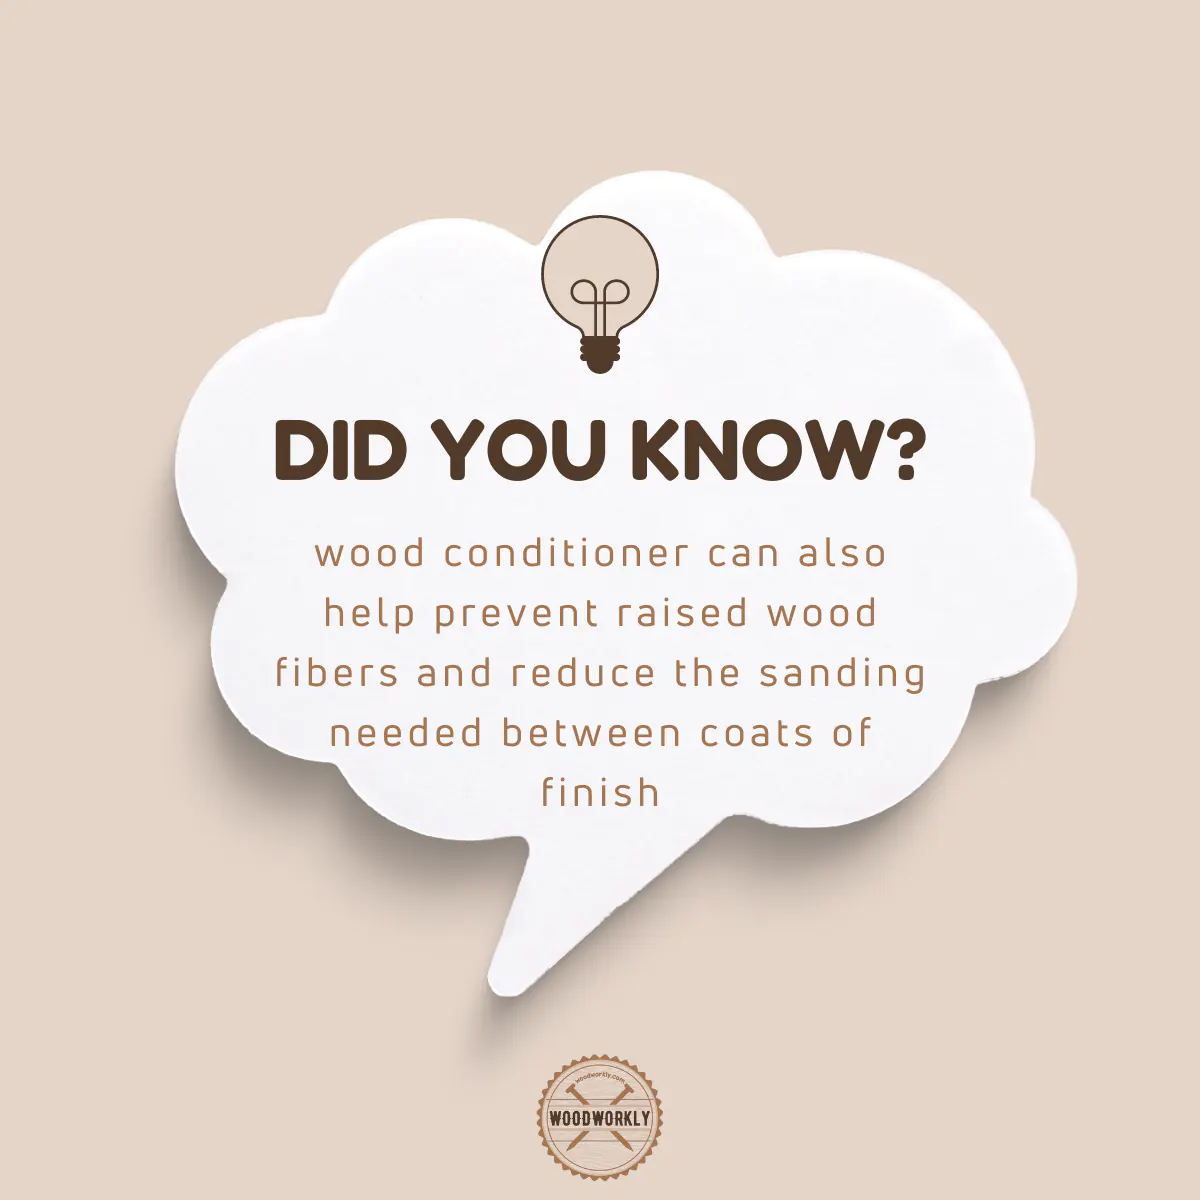 Did you know fact about wood conditioners